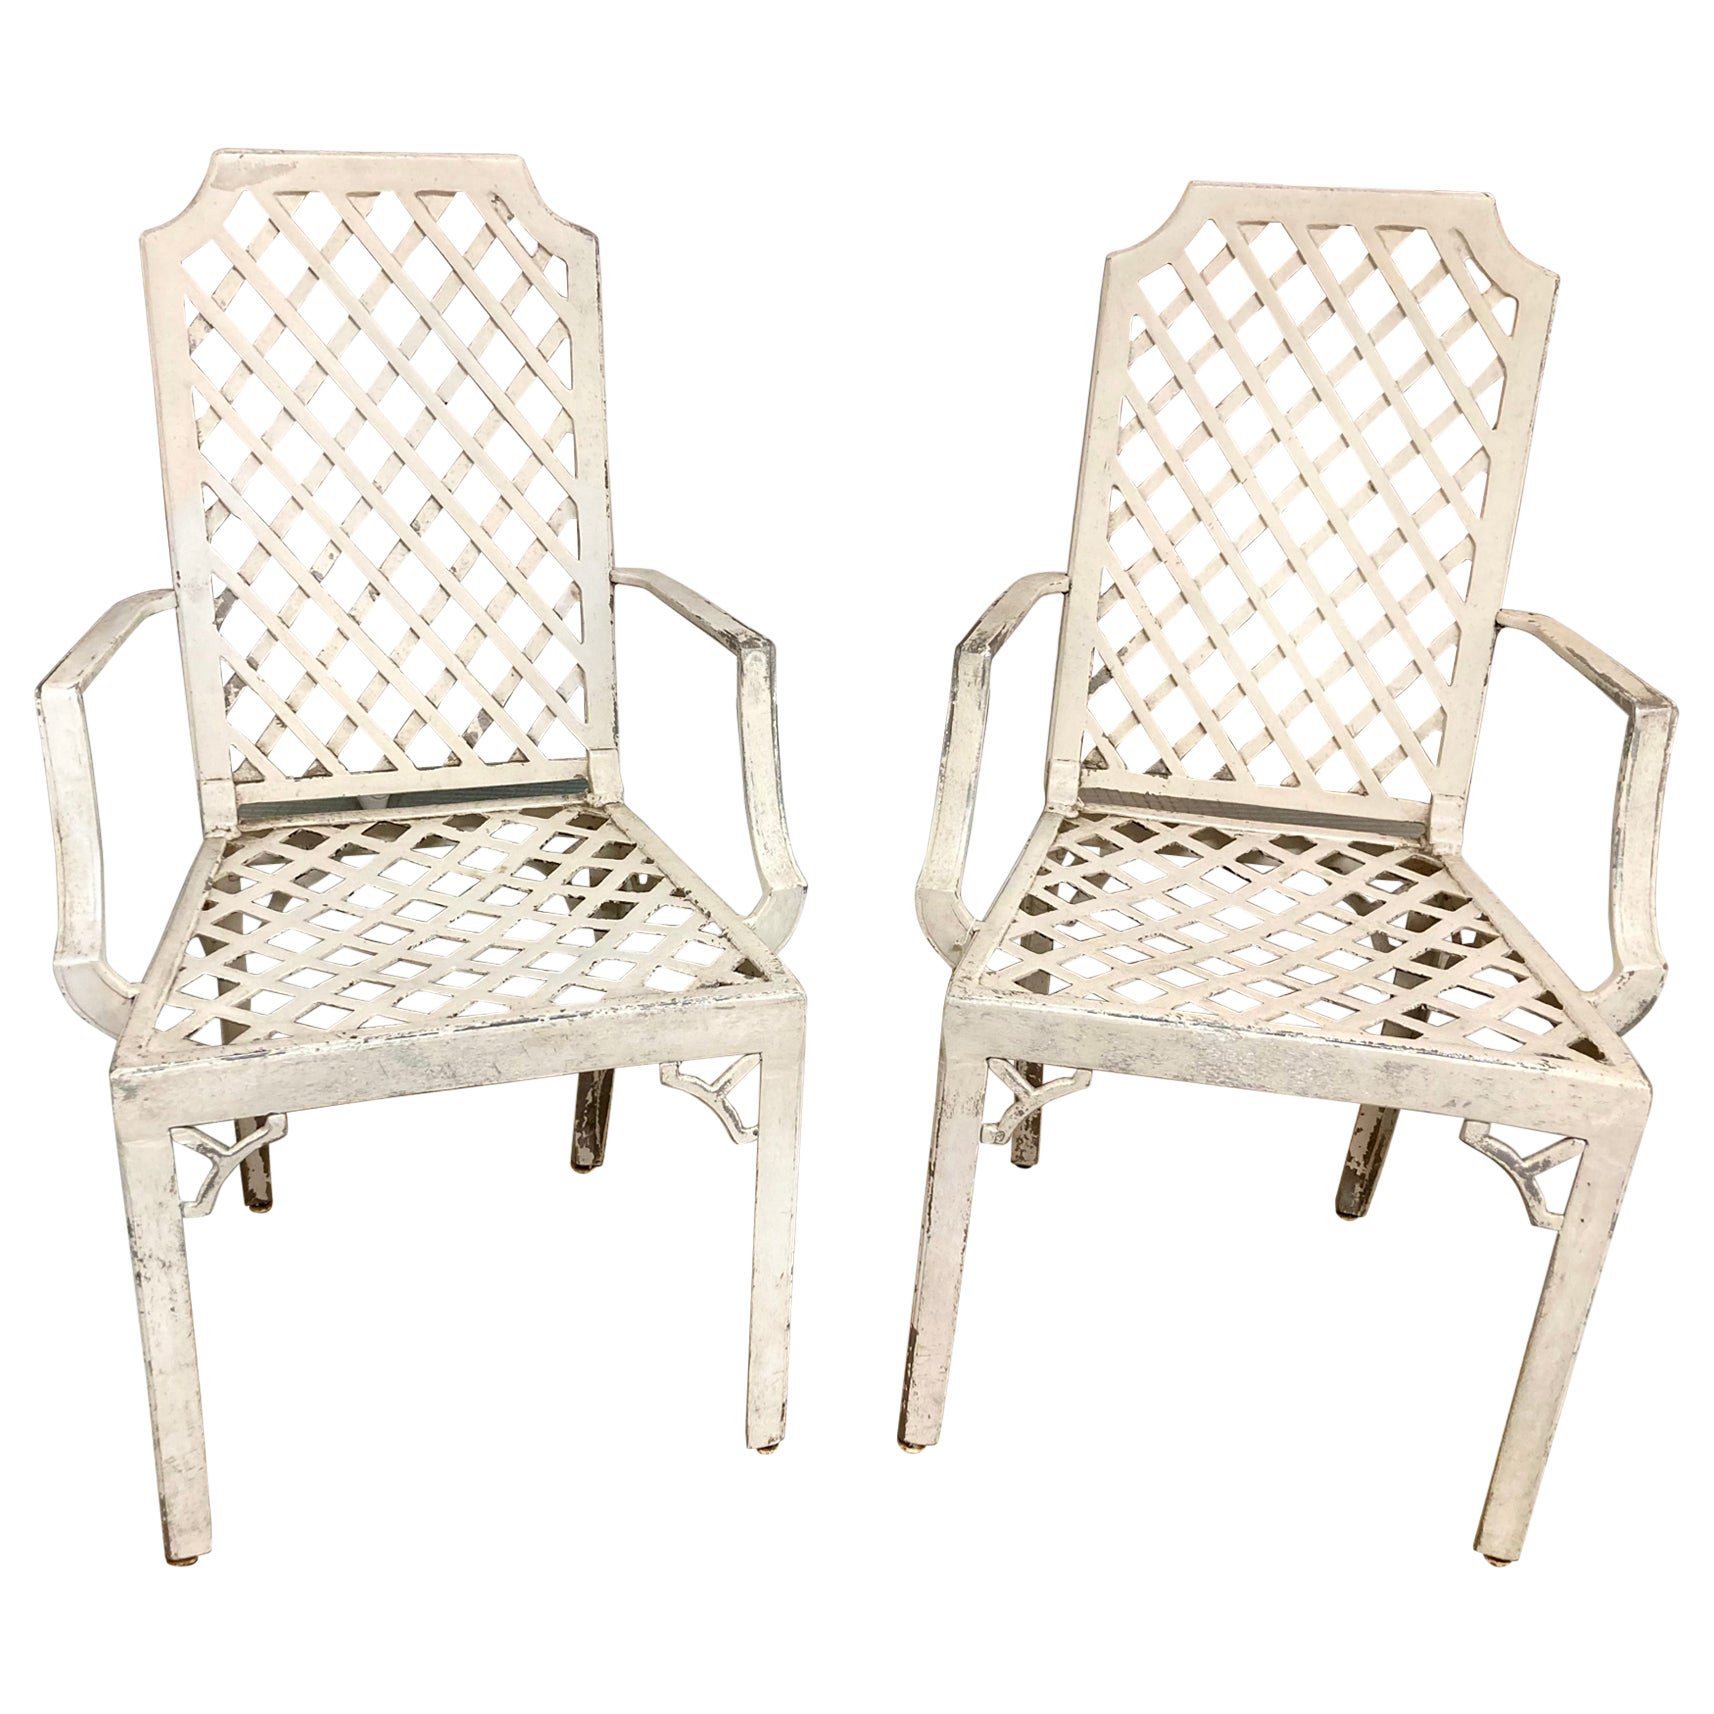 Hollywood Regency Lattice Pattern Patio Arm Chairs in Original Finish, a Pair For Sale